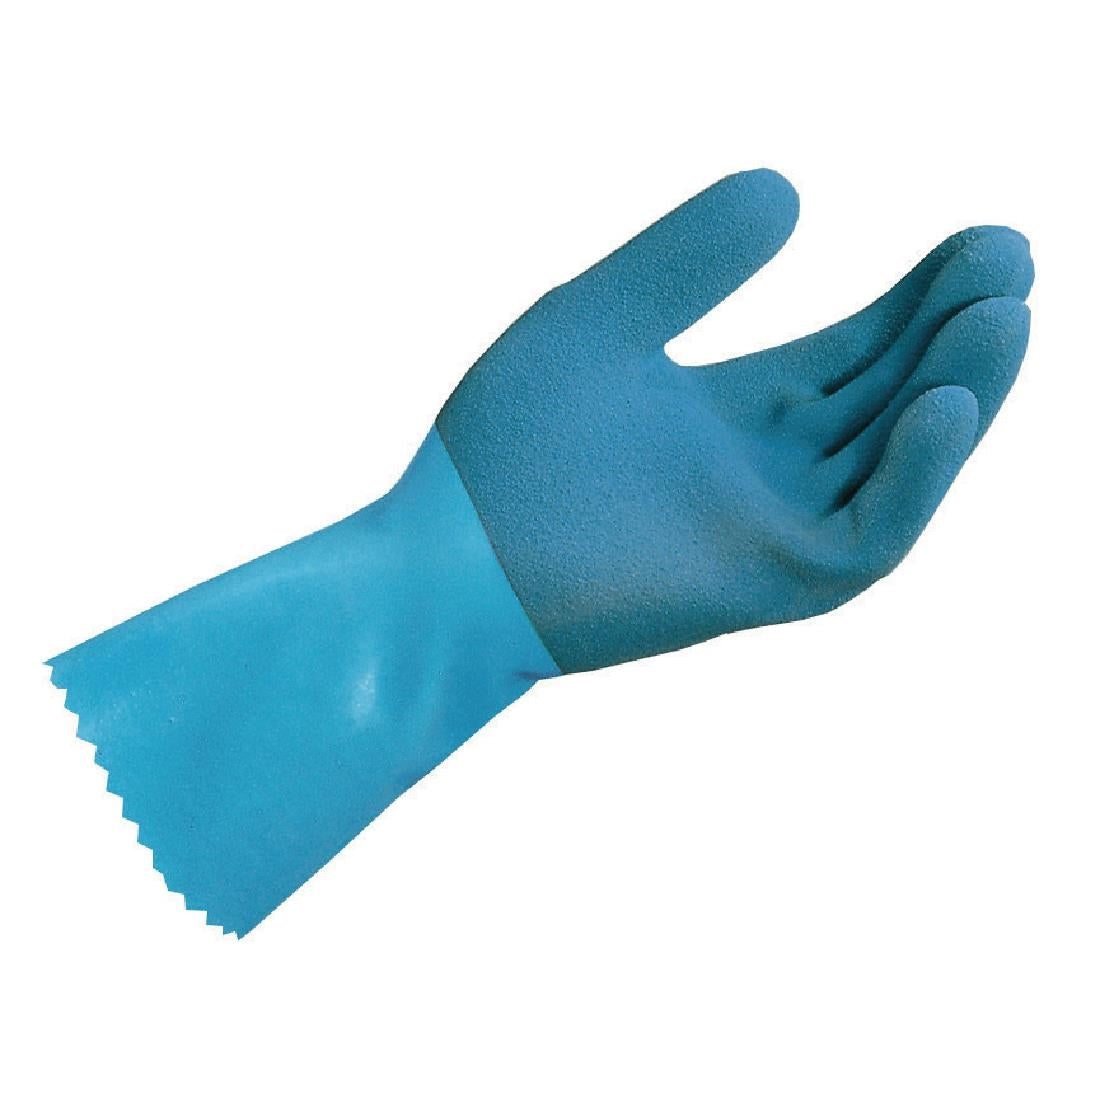 MAPA Jersette Janitorial Glove 20cm JD Catering Equipment Solutions Ltd